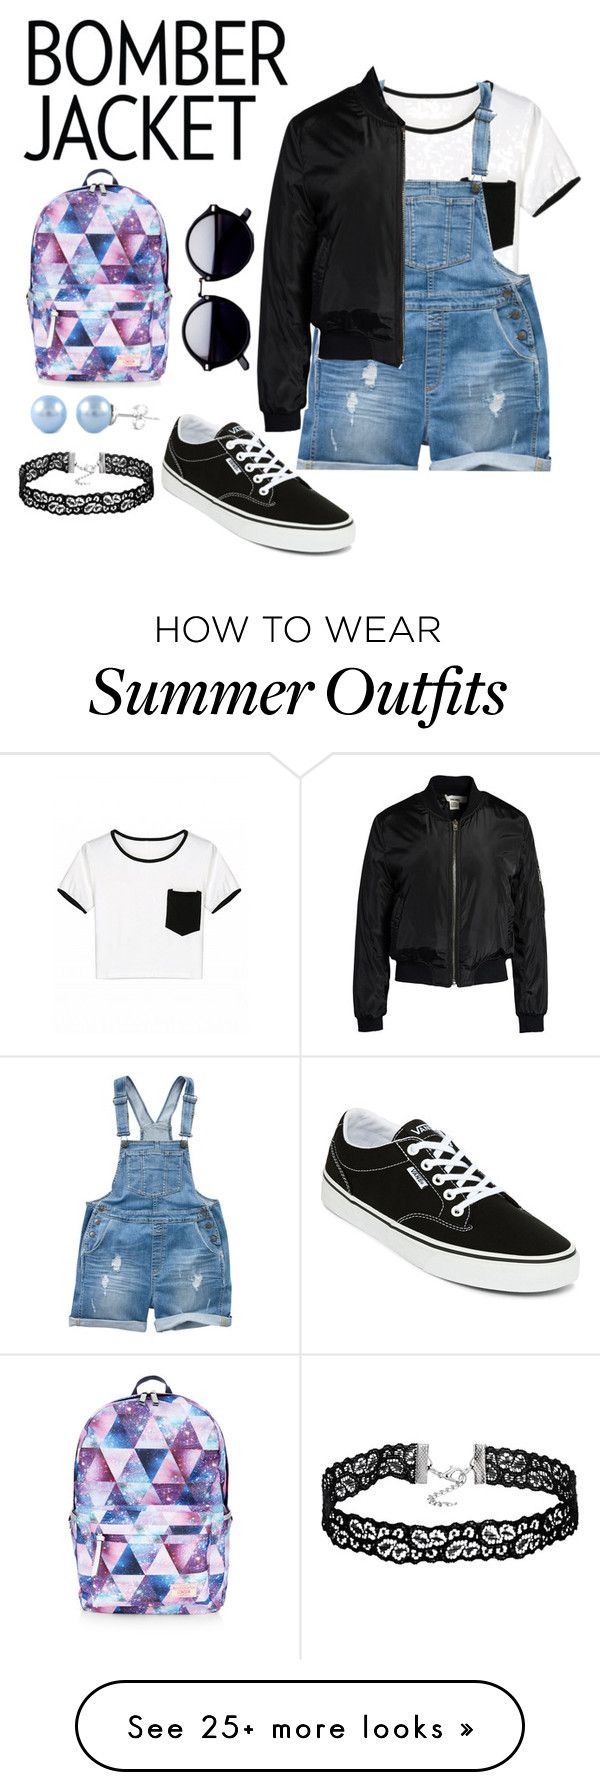 "Bomber Jacket contest outfit" by hannah-triggs on Polyvore featuring ...